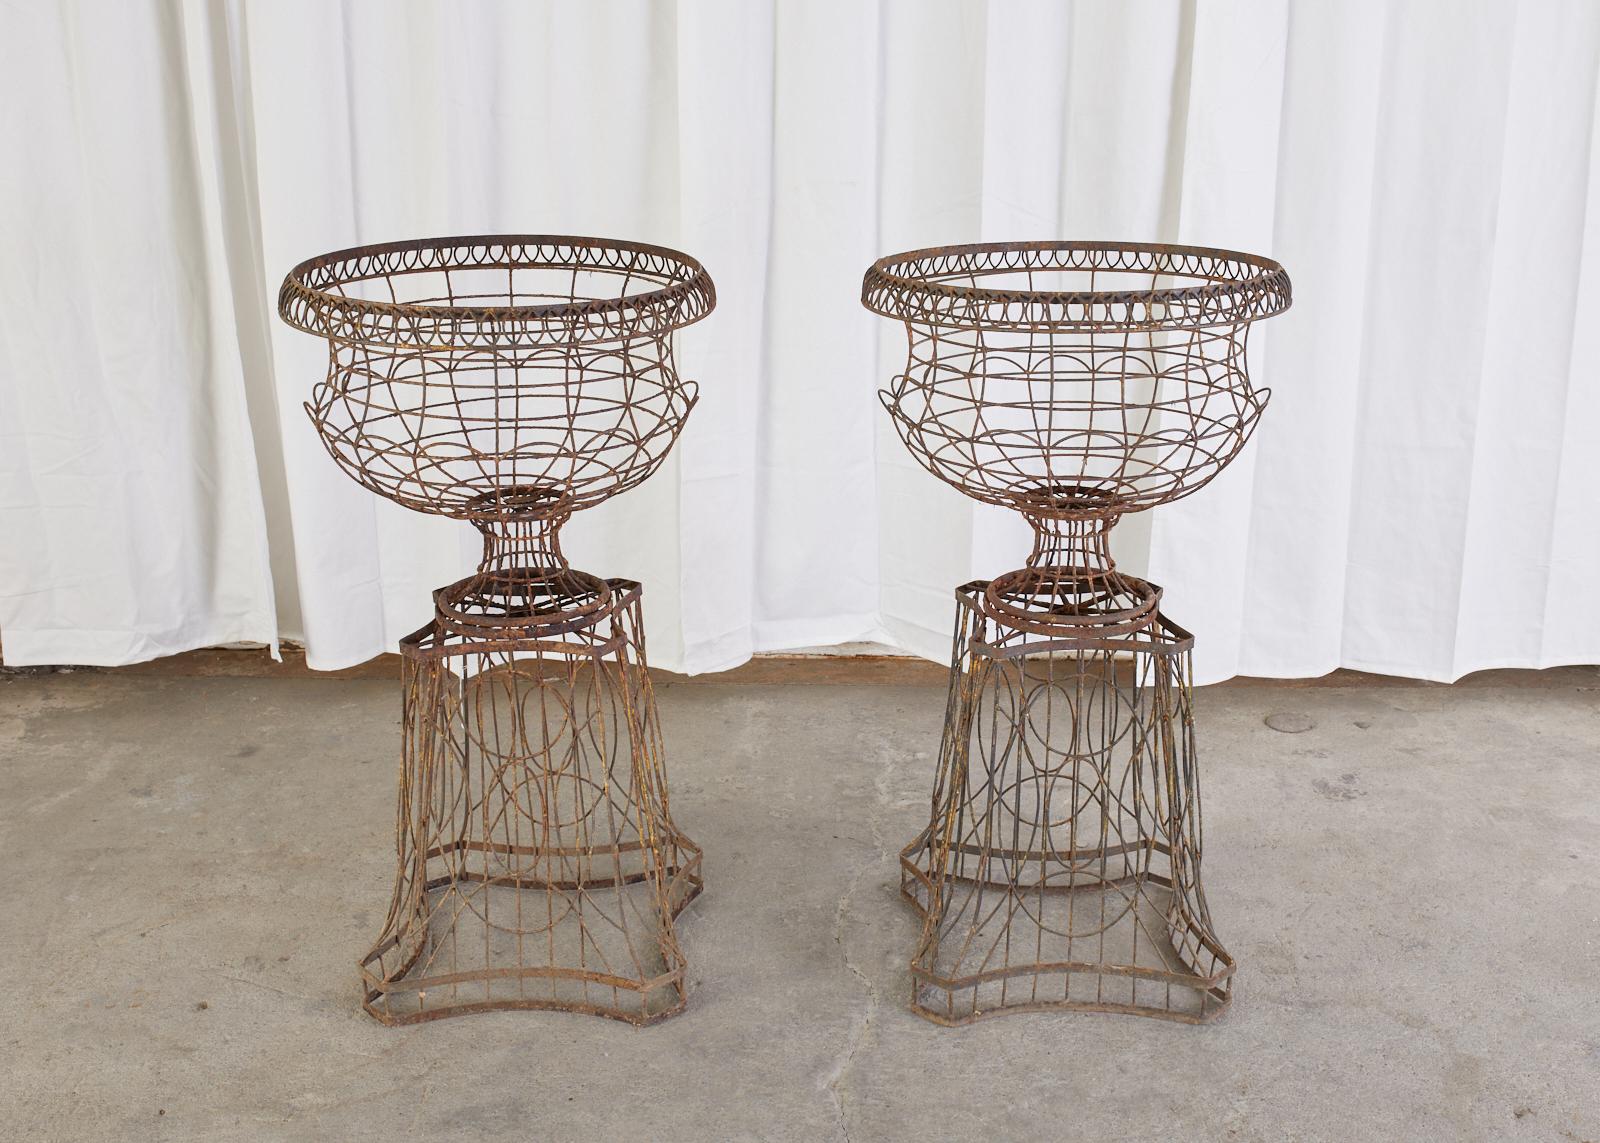 Hand-Crafted Pair of French Art Nouveau Iron Jardinieres on Stands